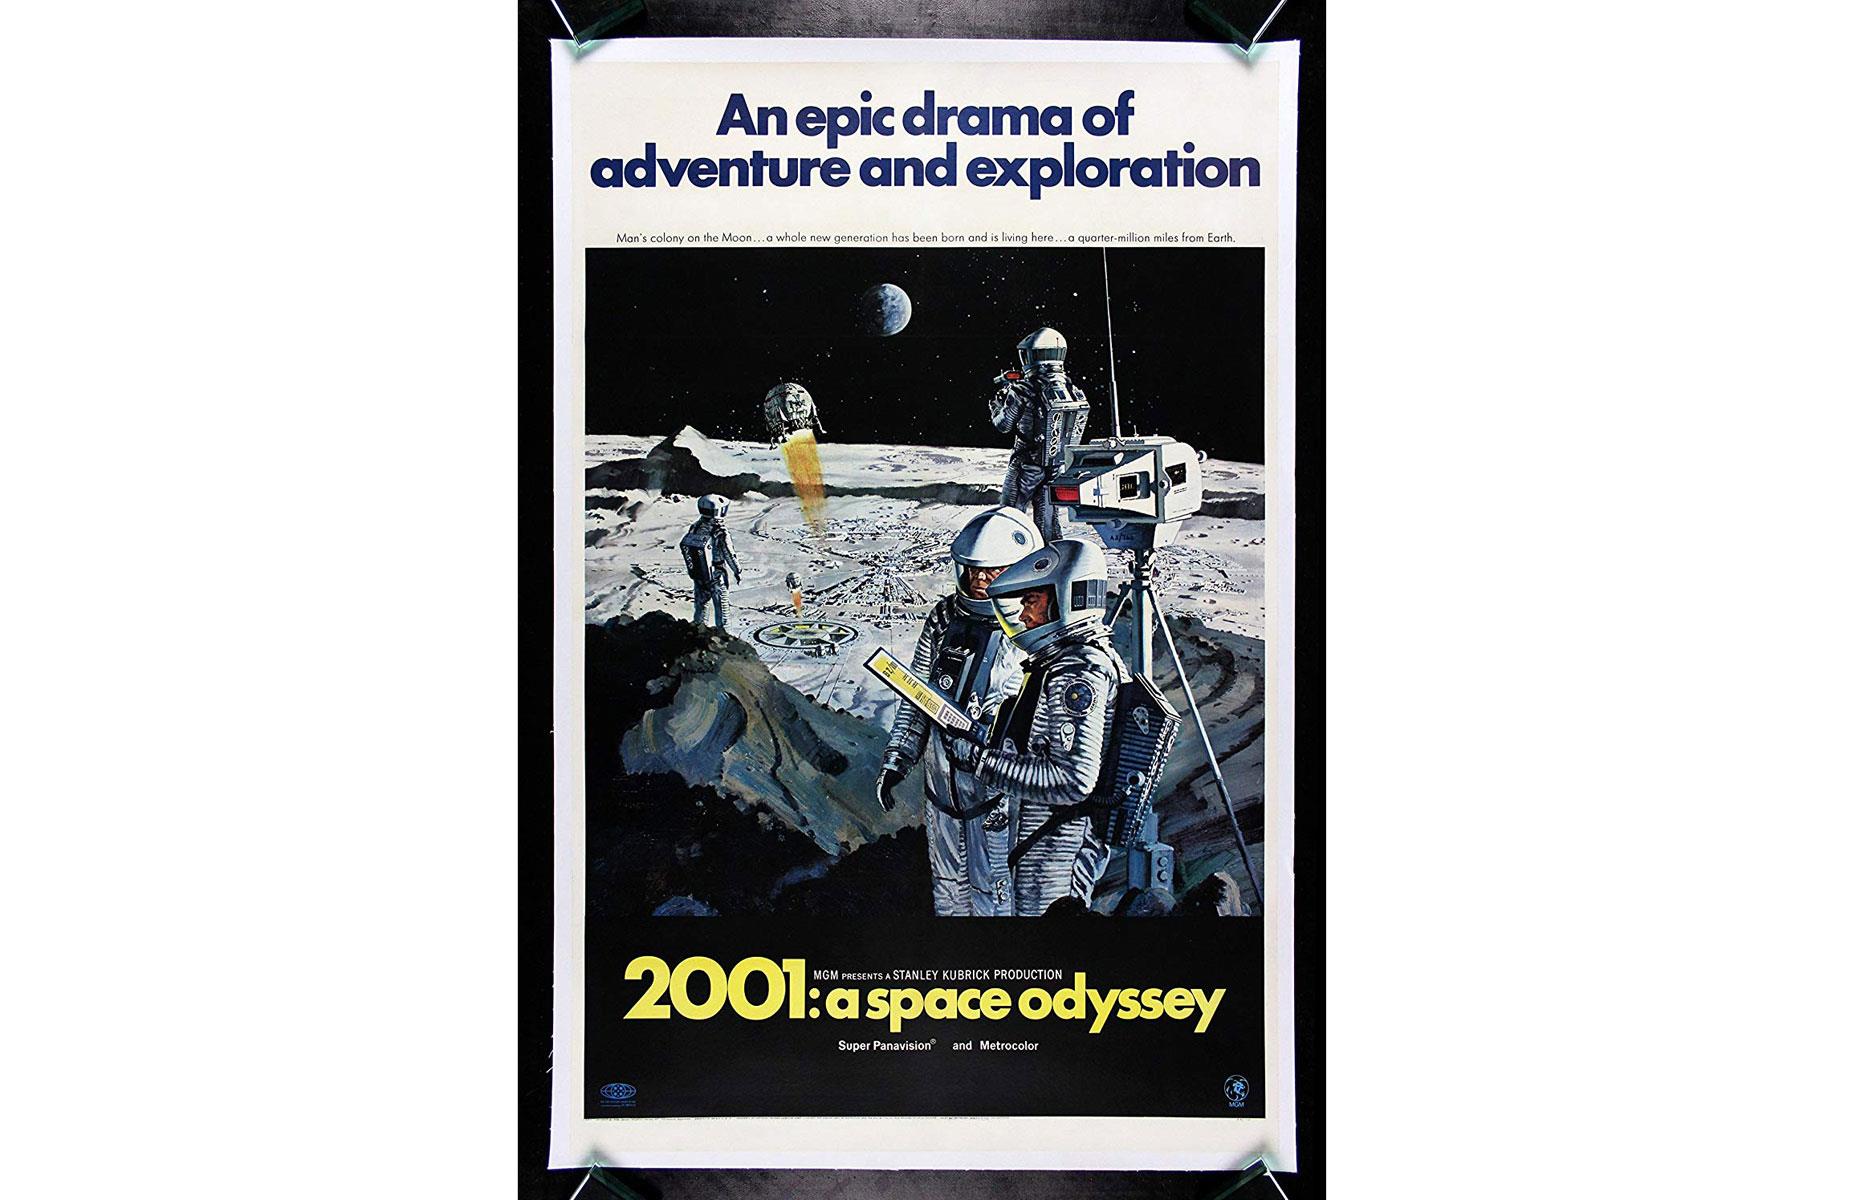 2001: A Space Odyssey (American poster, 1968): up to $1,600 (£1.2k)